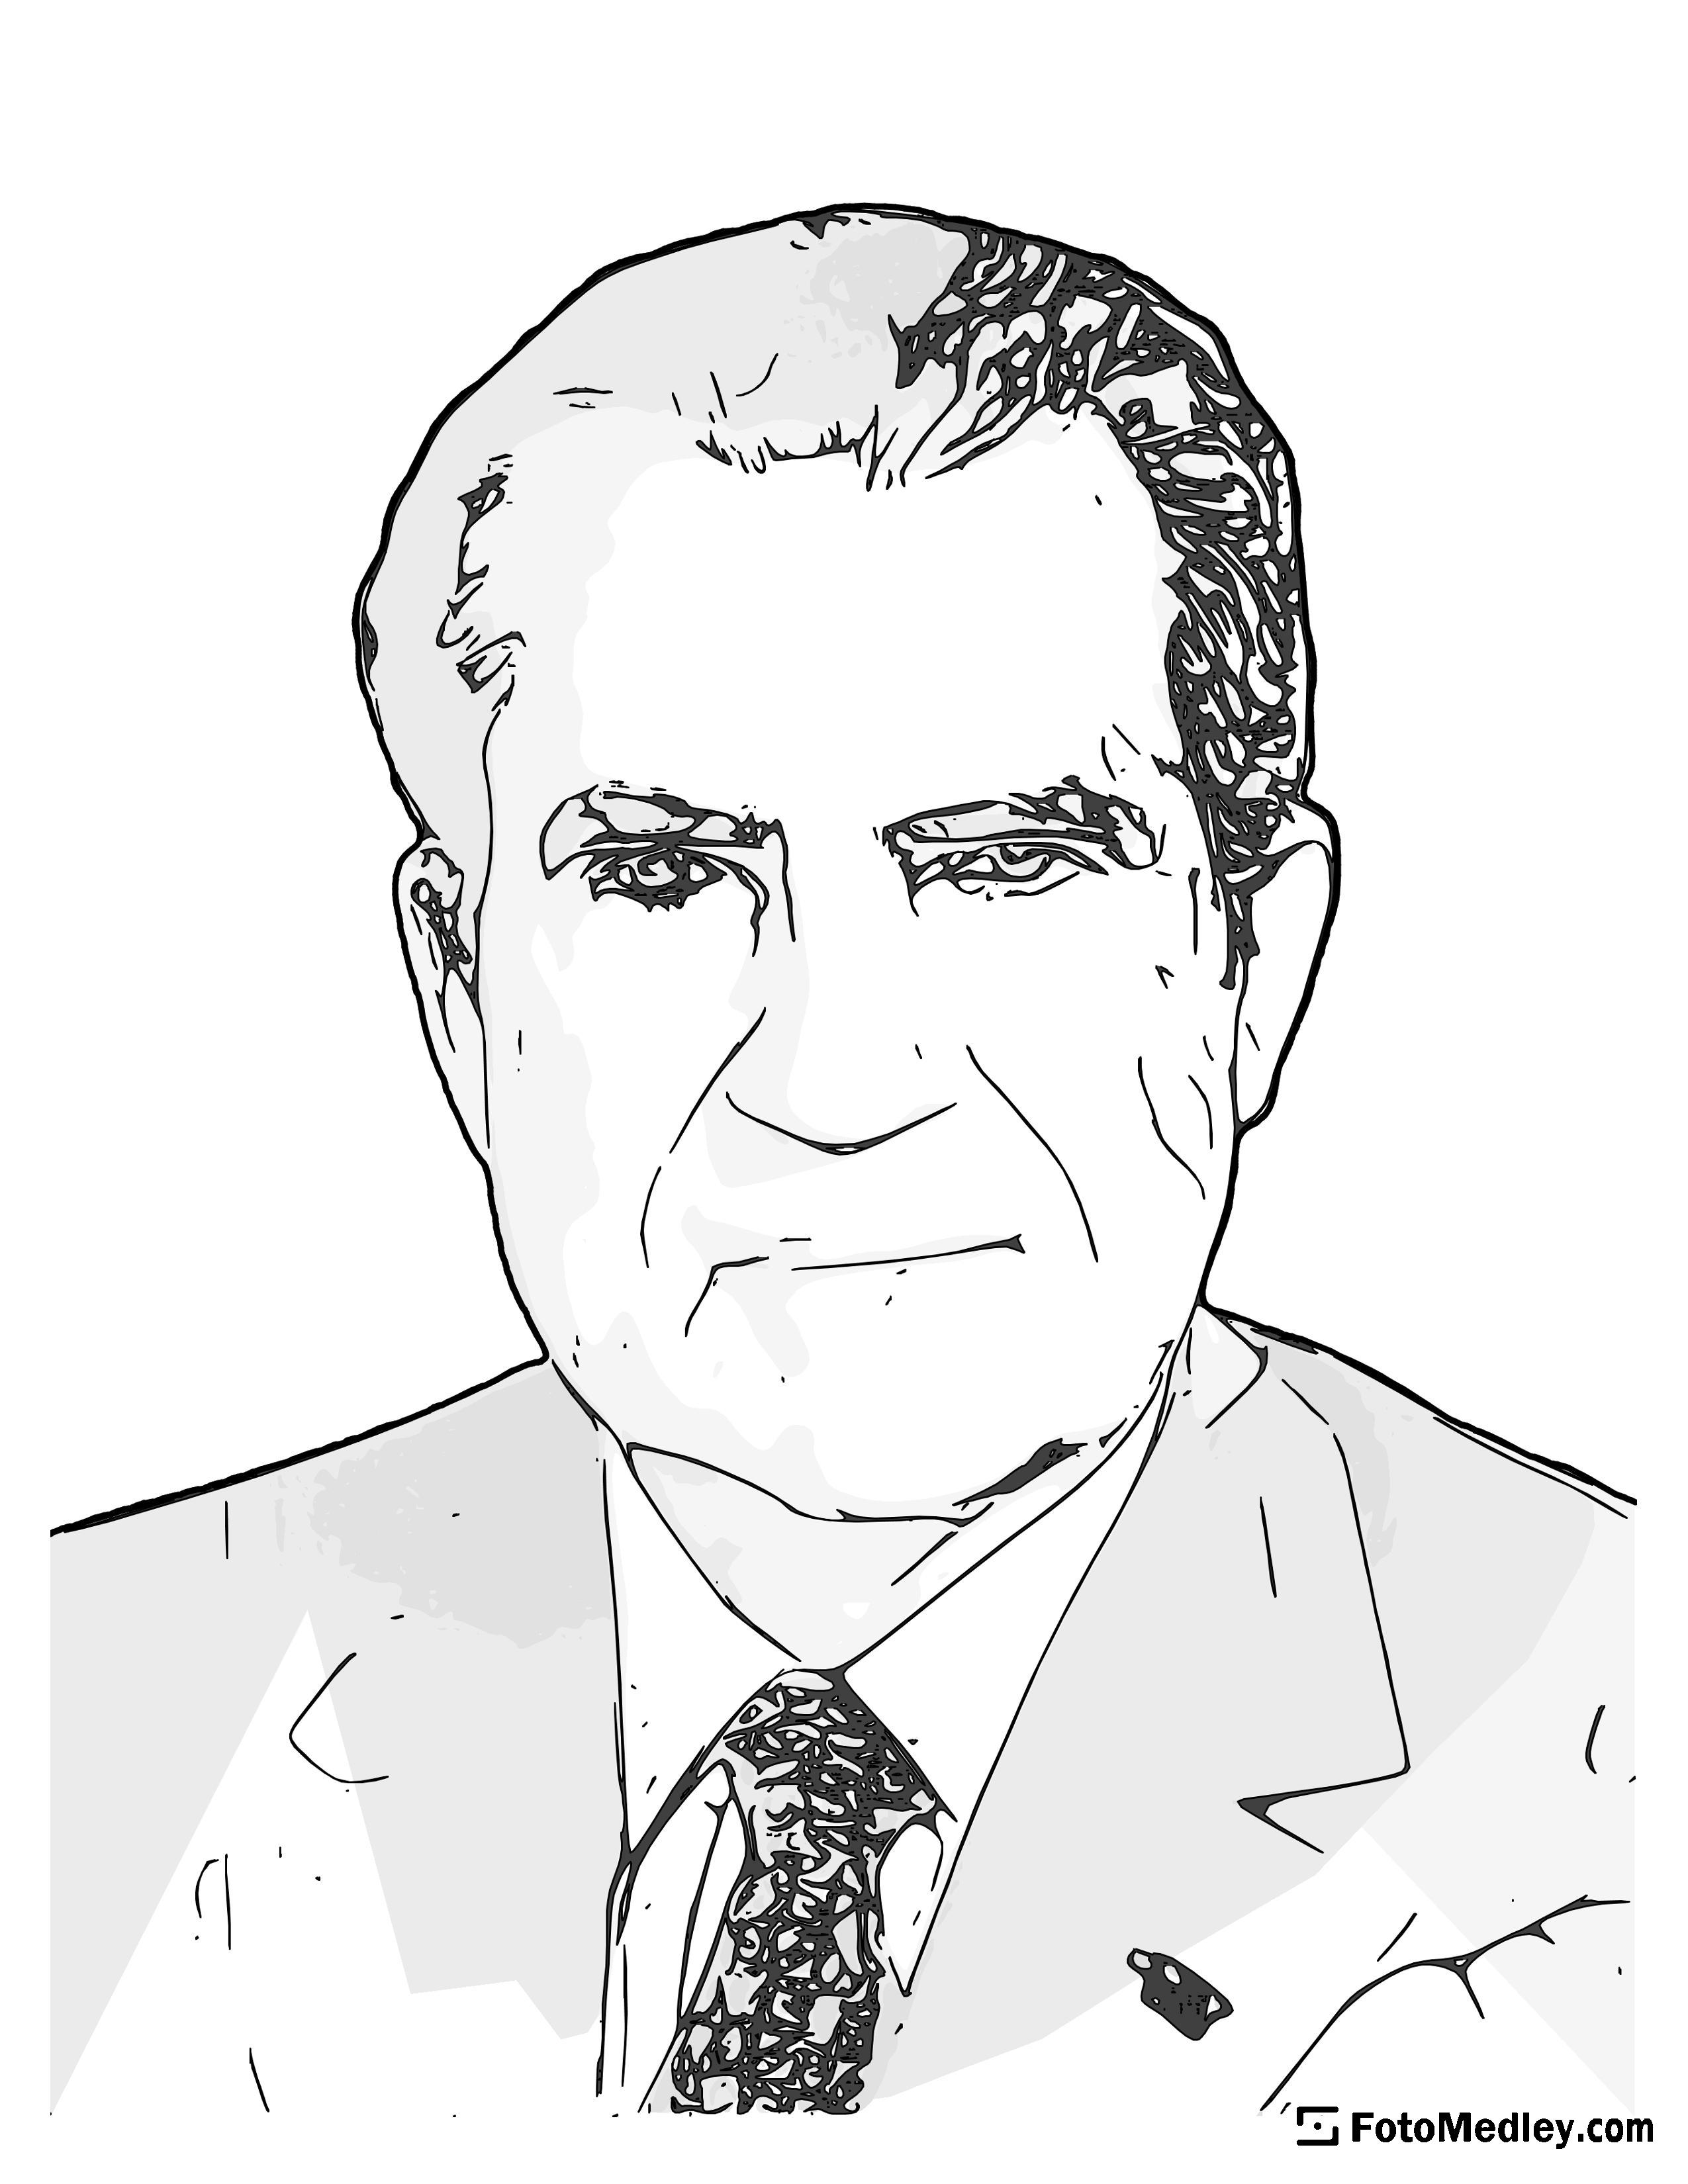 A cartoon style coloring sketch of Richard M. Nixon, 37th President of the United States.